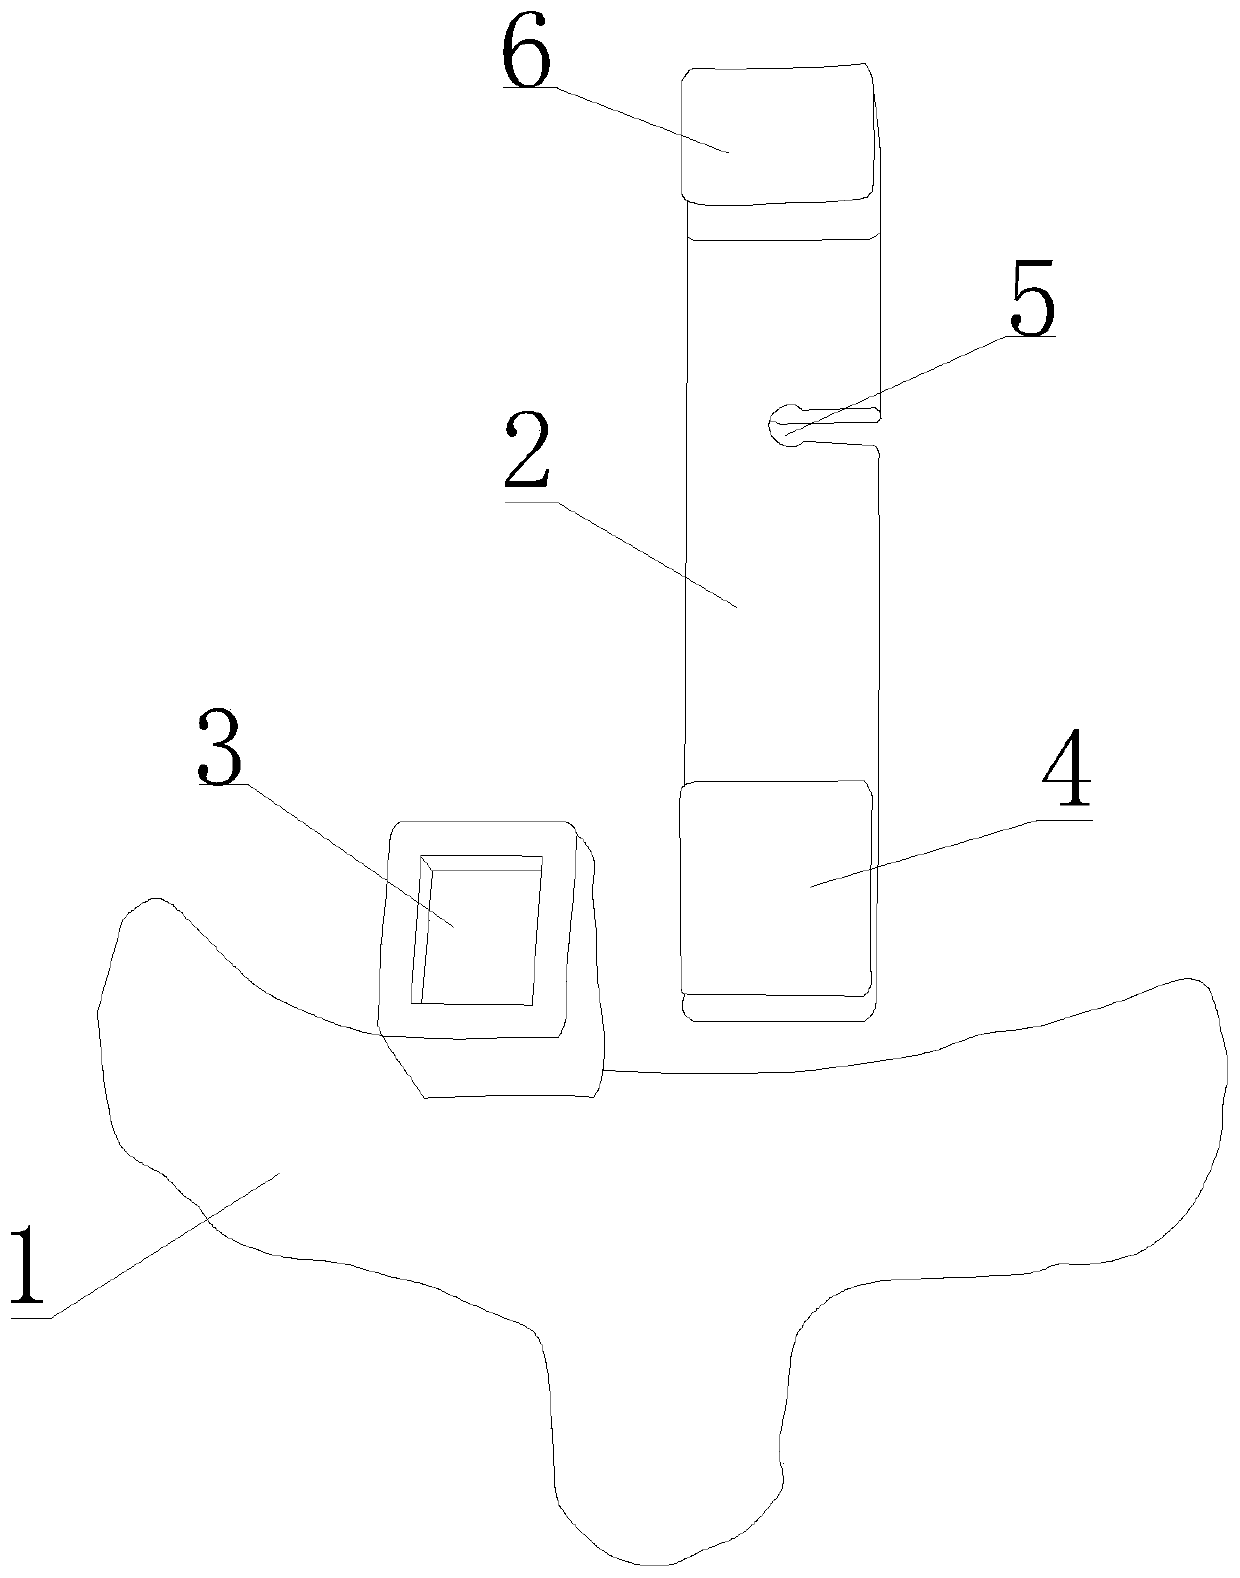 Surgical positioning device for intracranial lesions